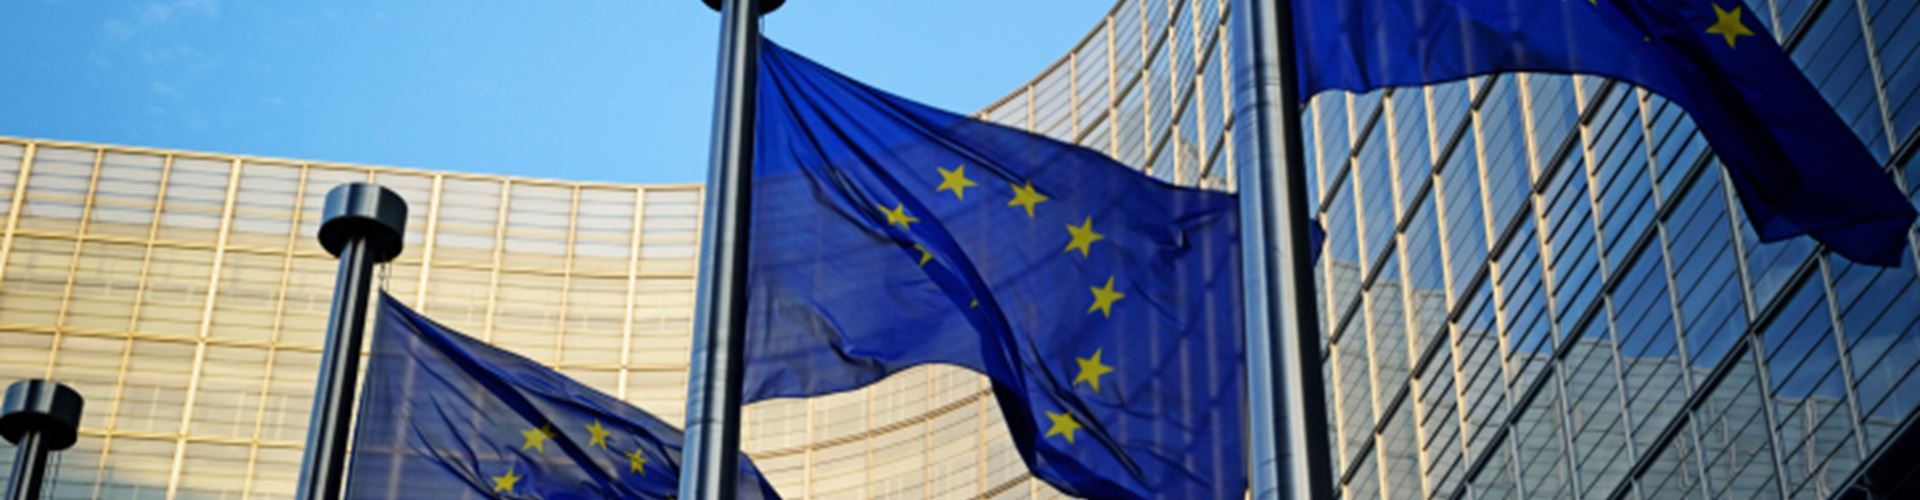 Revised corporate tax base proposal gets new EU consultation